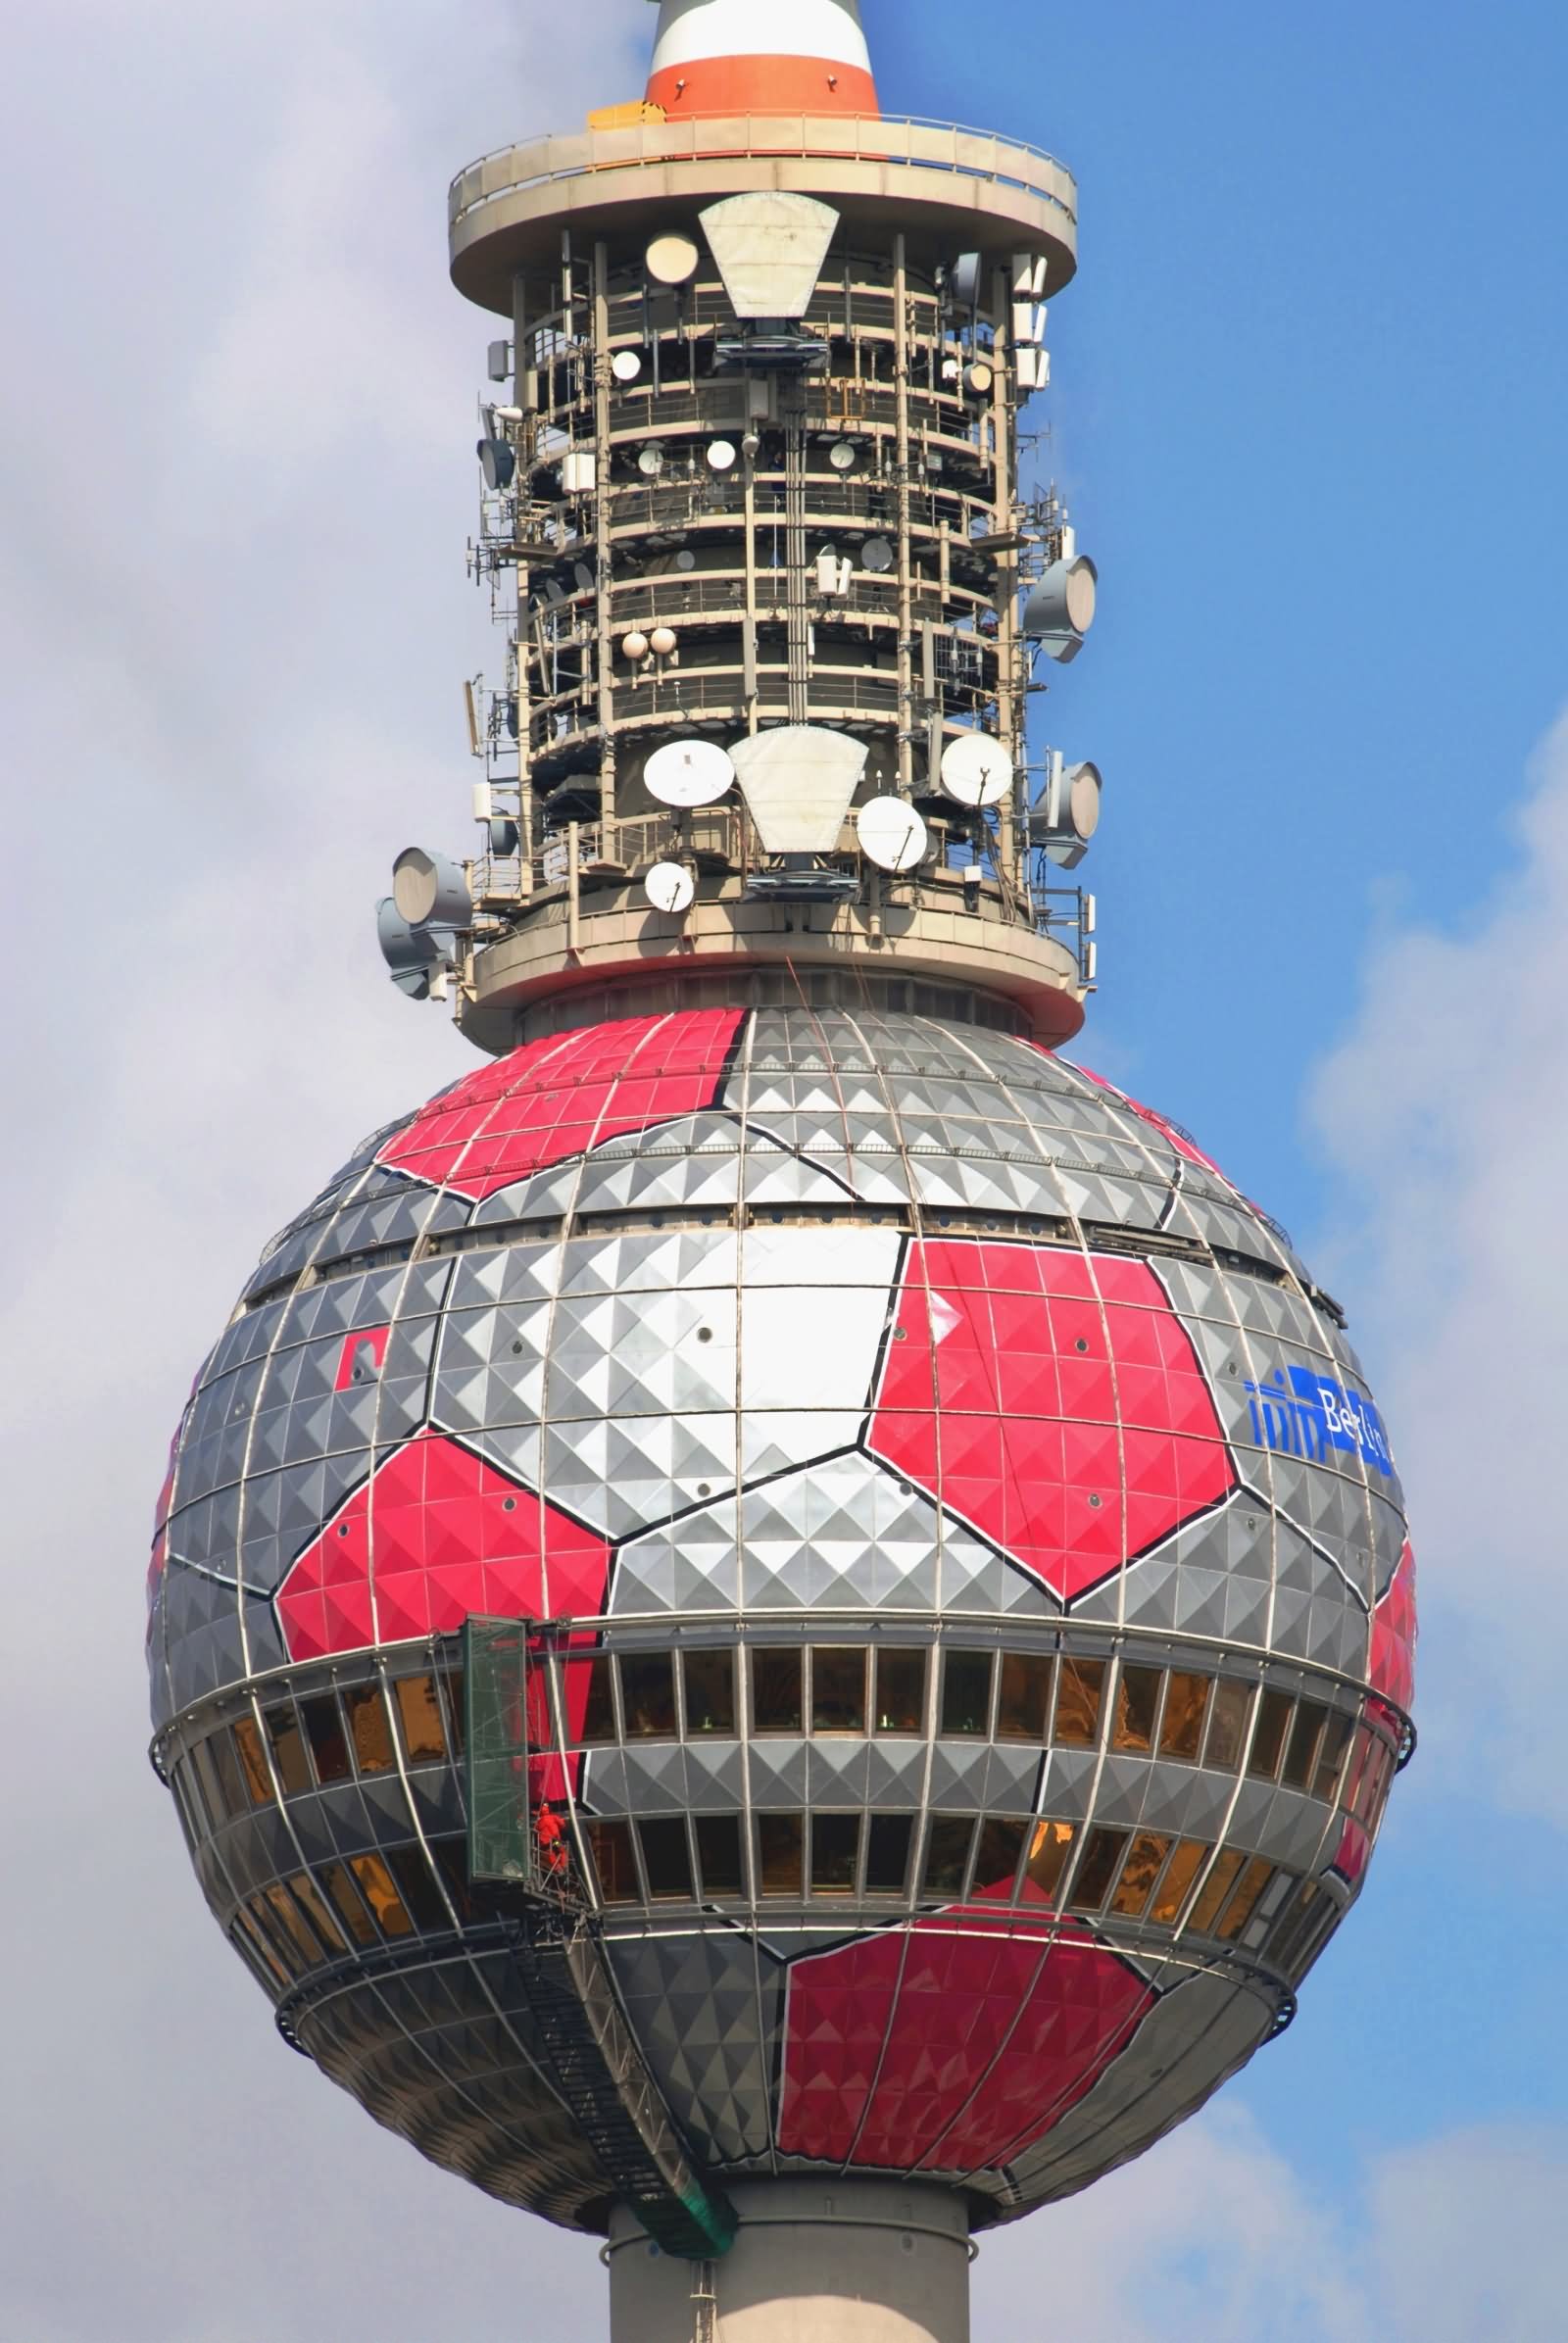 Closeup Of The Stainless Steel Dome Of The Fernsehturm Berlin Tower